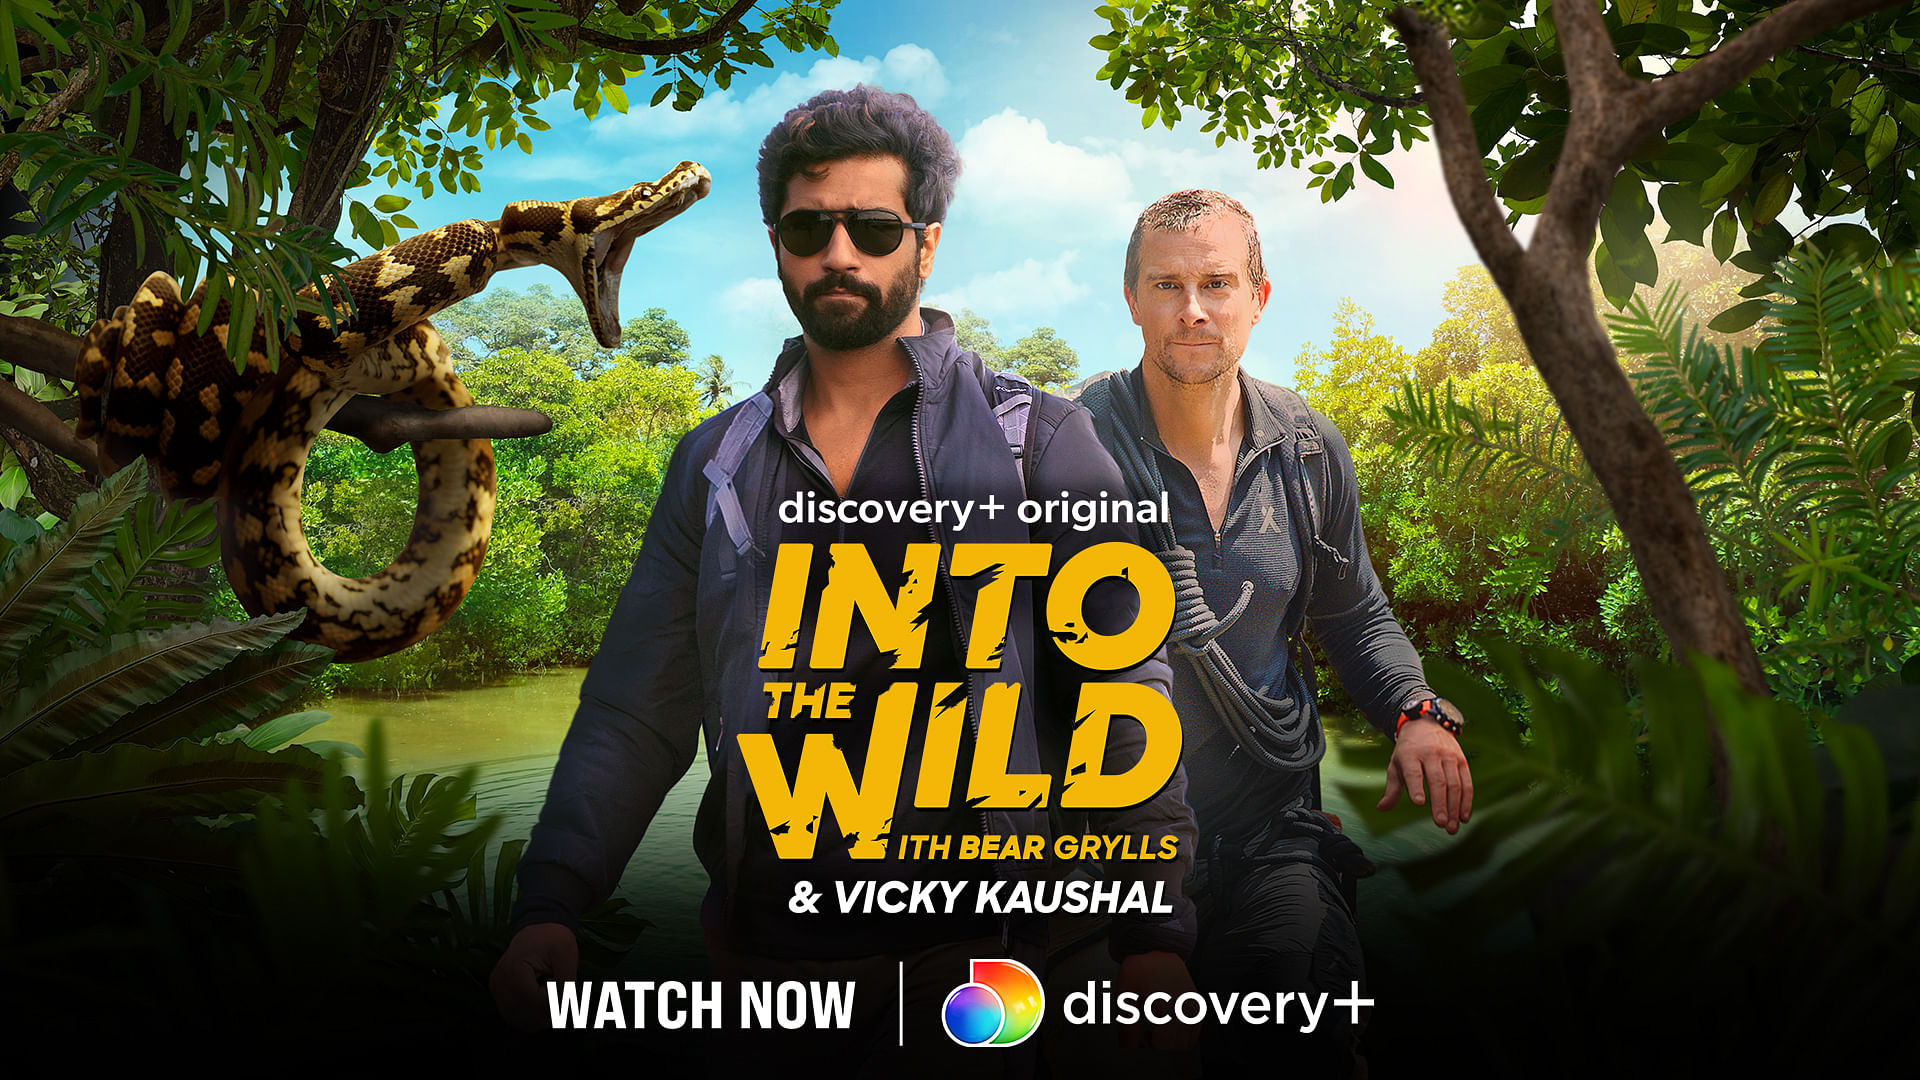 <div class="paragraphs"><p> Into The Wild With&nbsp;Vicky Kaushal and Bear Grylls</p></div>